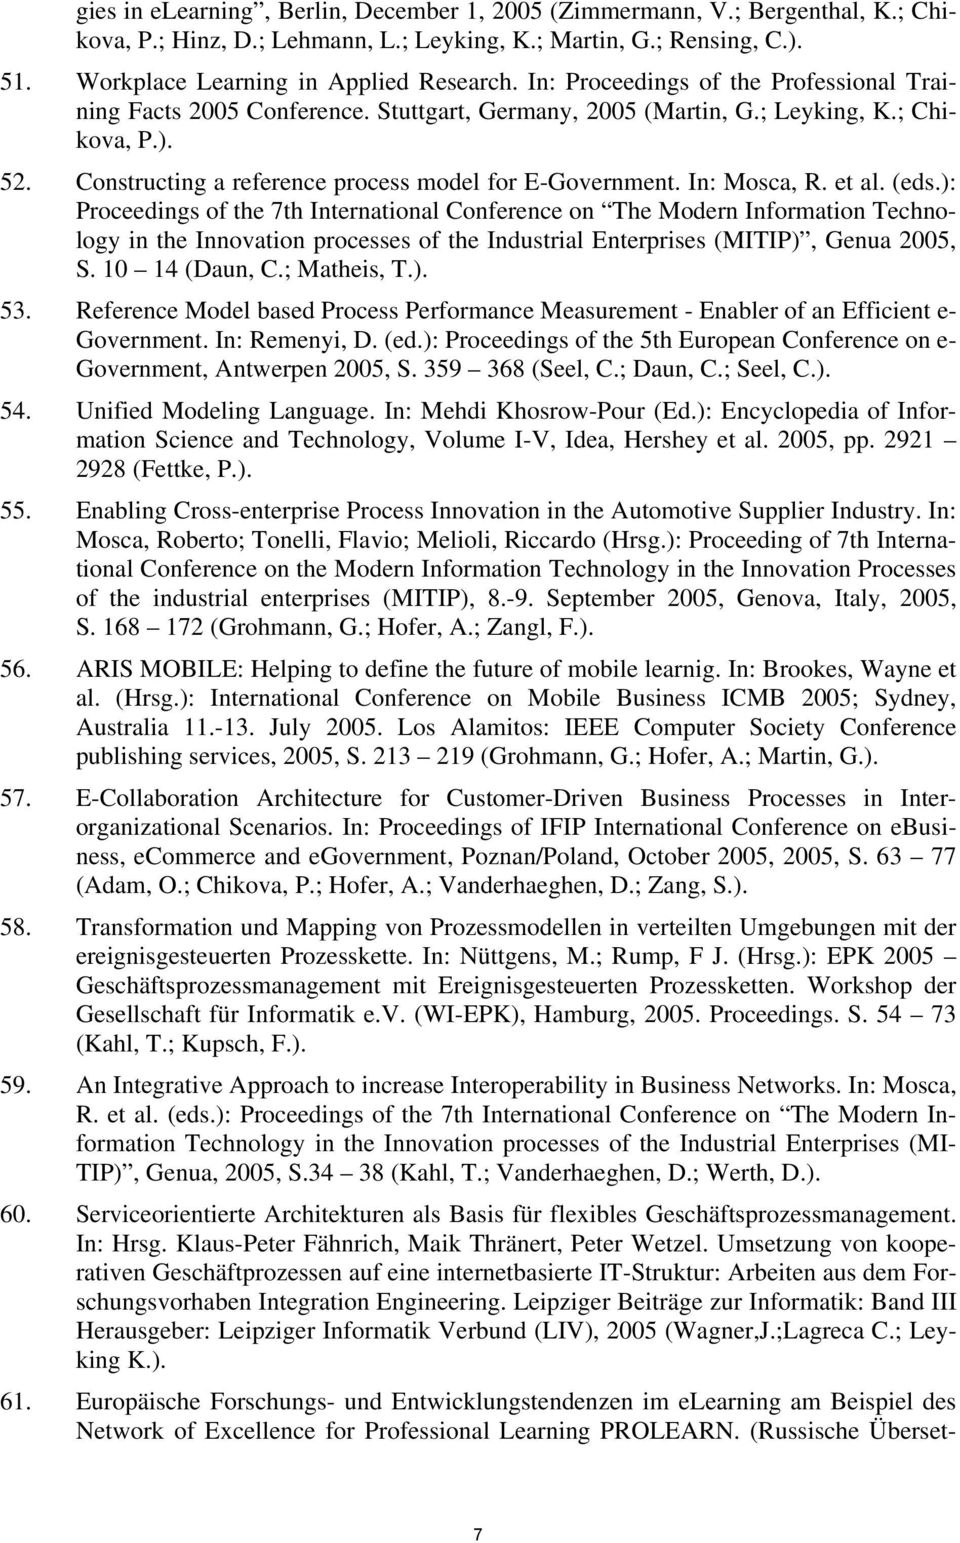 In: Mosca, R. et al. (eds.): Proceedings of the 7th International Conference on The Modern Information Technology in the Innovation processes of the Industrial Enterprises (MITIP), Genua 2005, S.